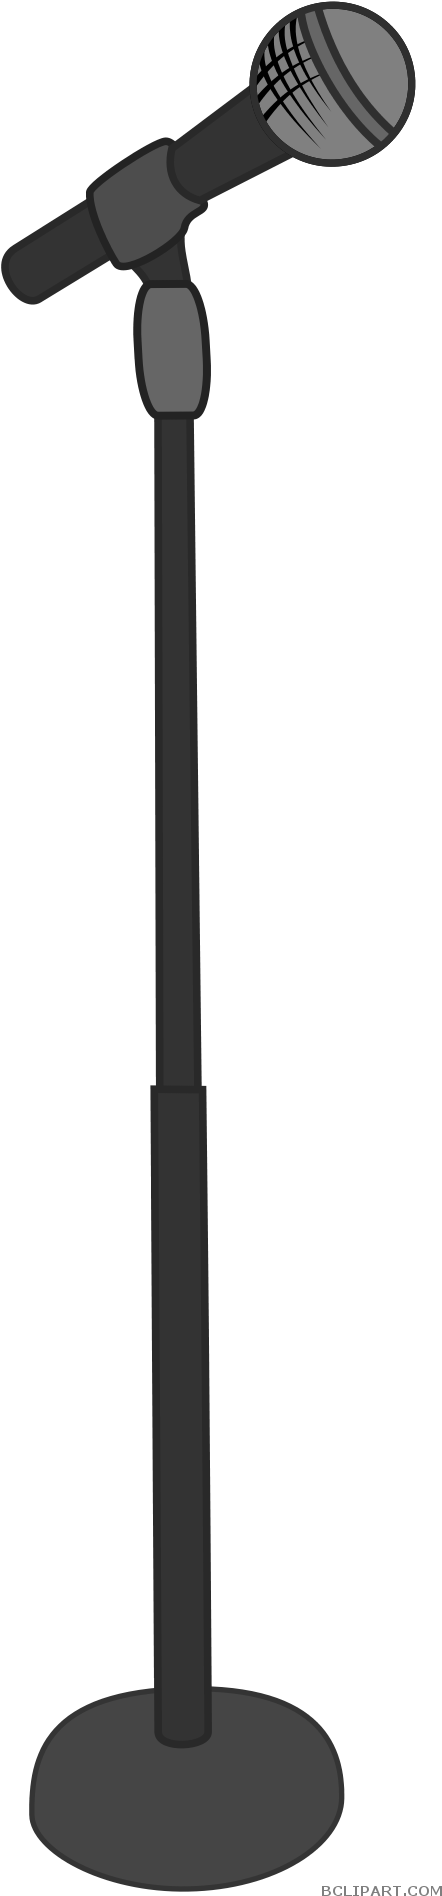 Microphone Stand Clipart - Microphone With Stand Clipart (480x1918), Png Download